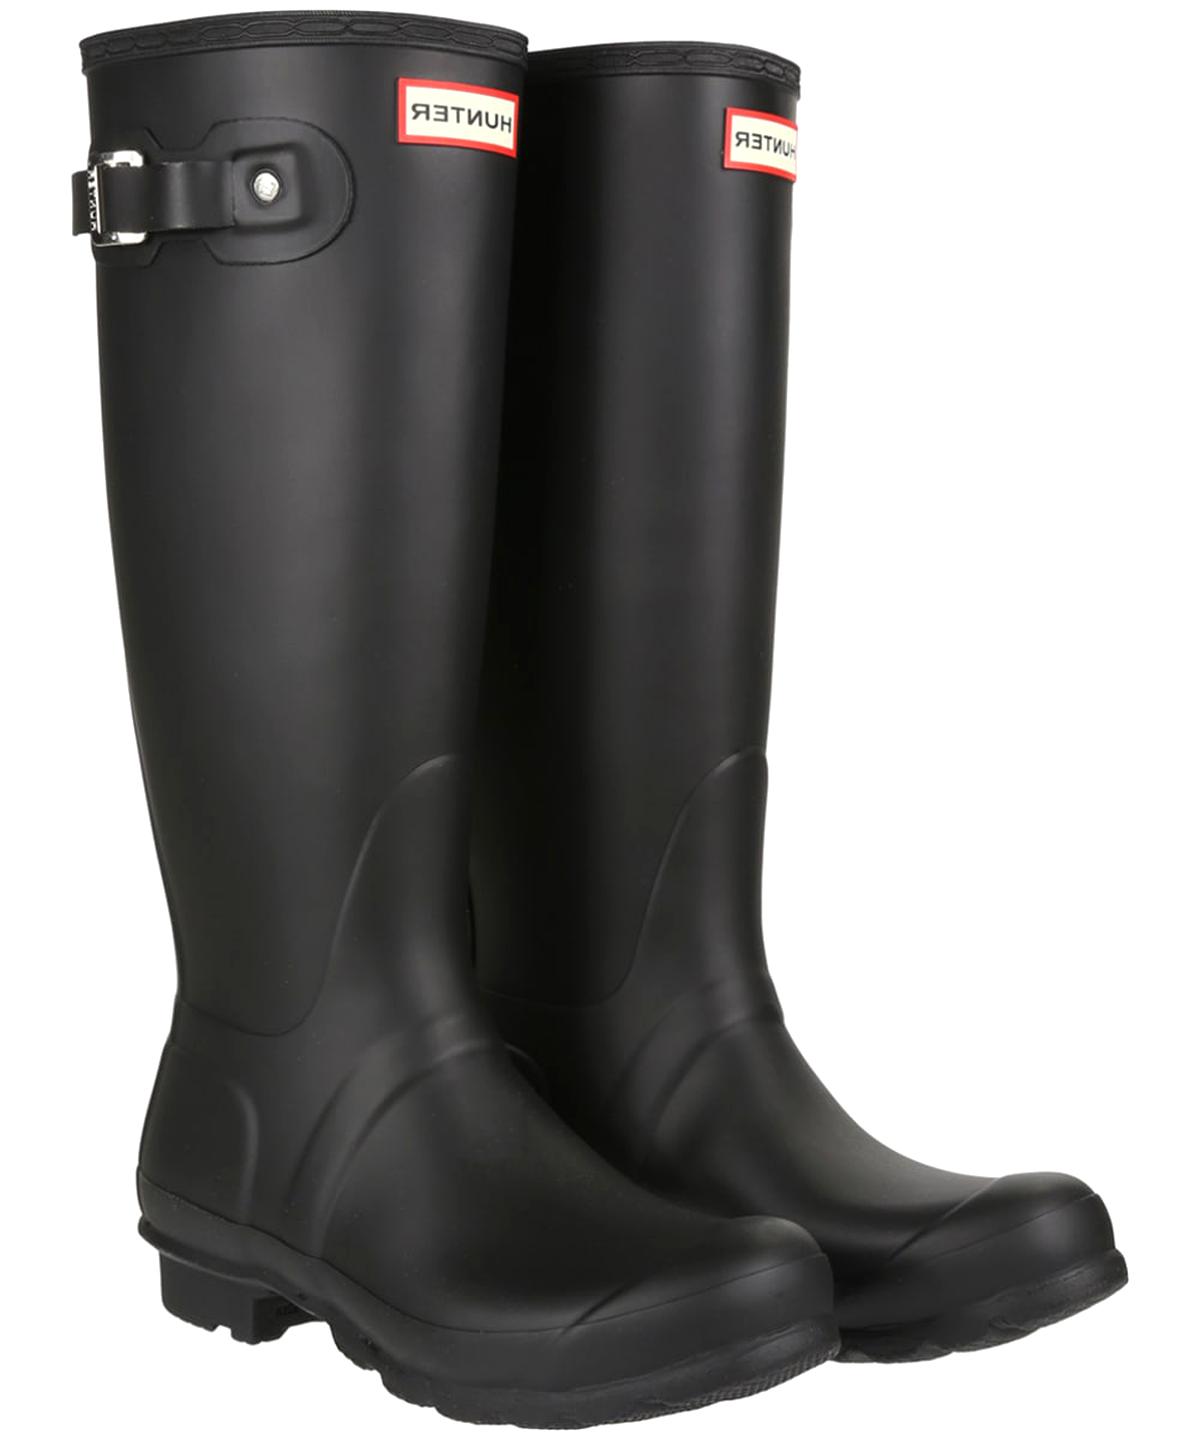 Womens Hunter Wellies for sale in UK | 66 used Womens Hunter Wellies